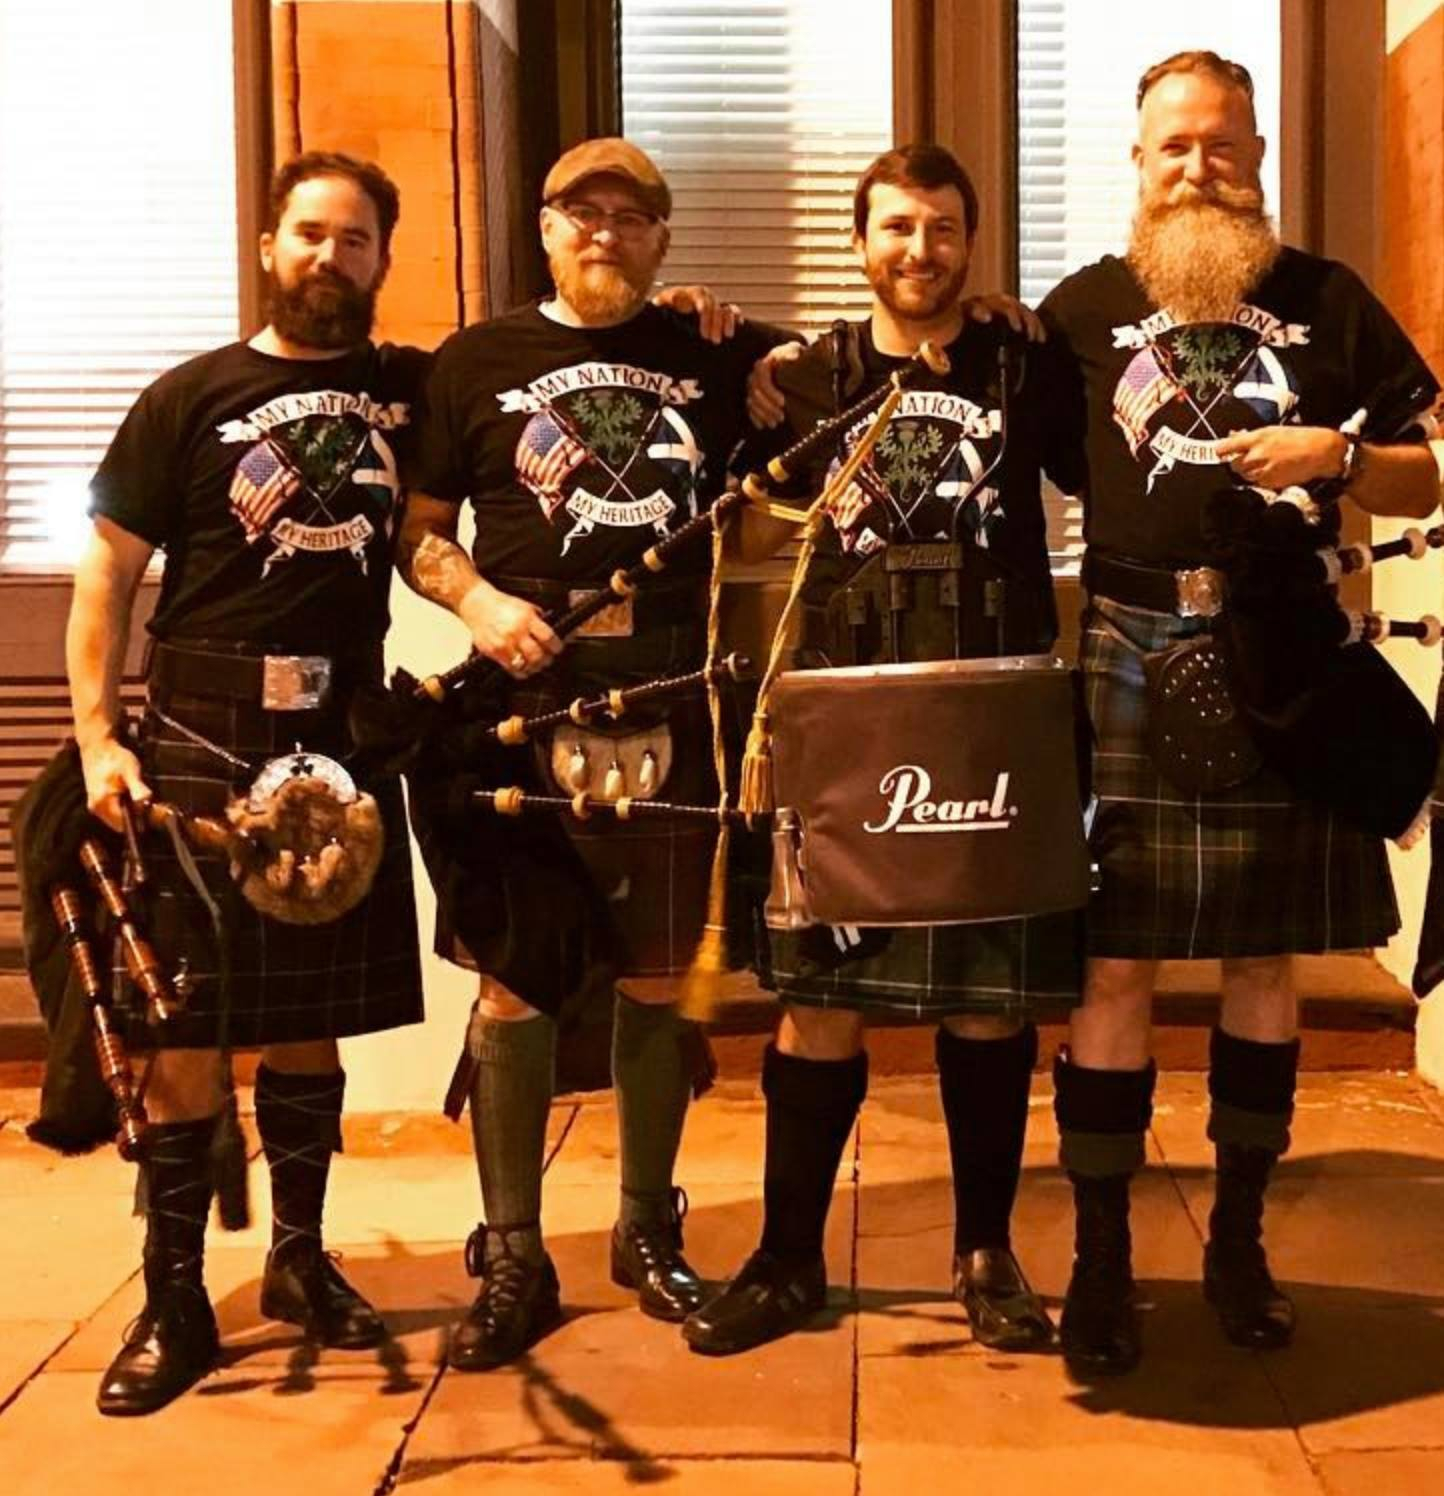 Bobby Hoyt playing drums in a kilt on St. Patrick’s Day